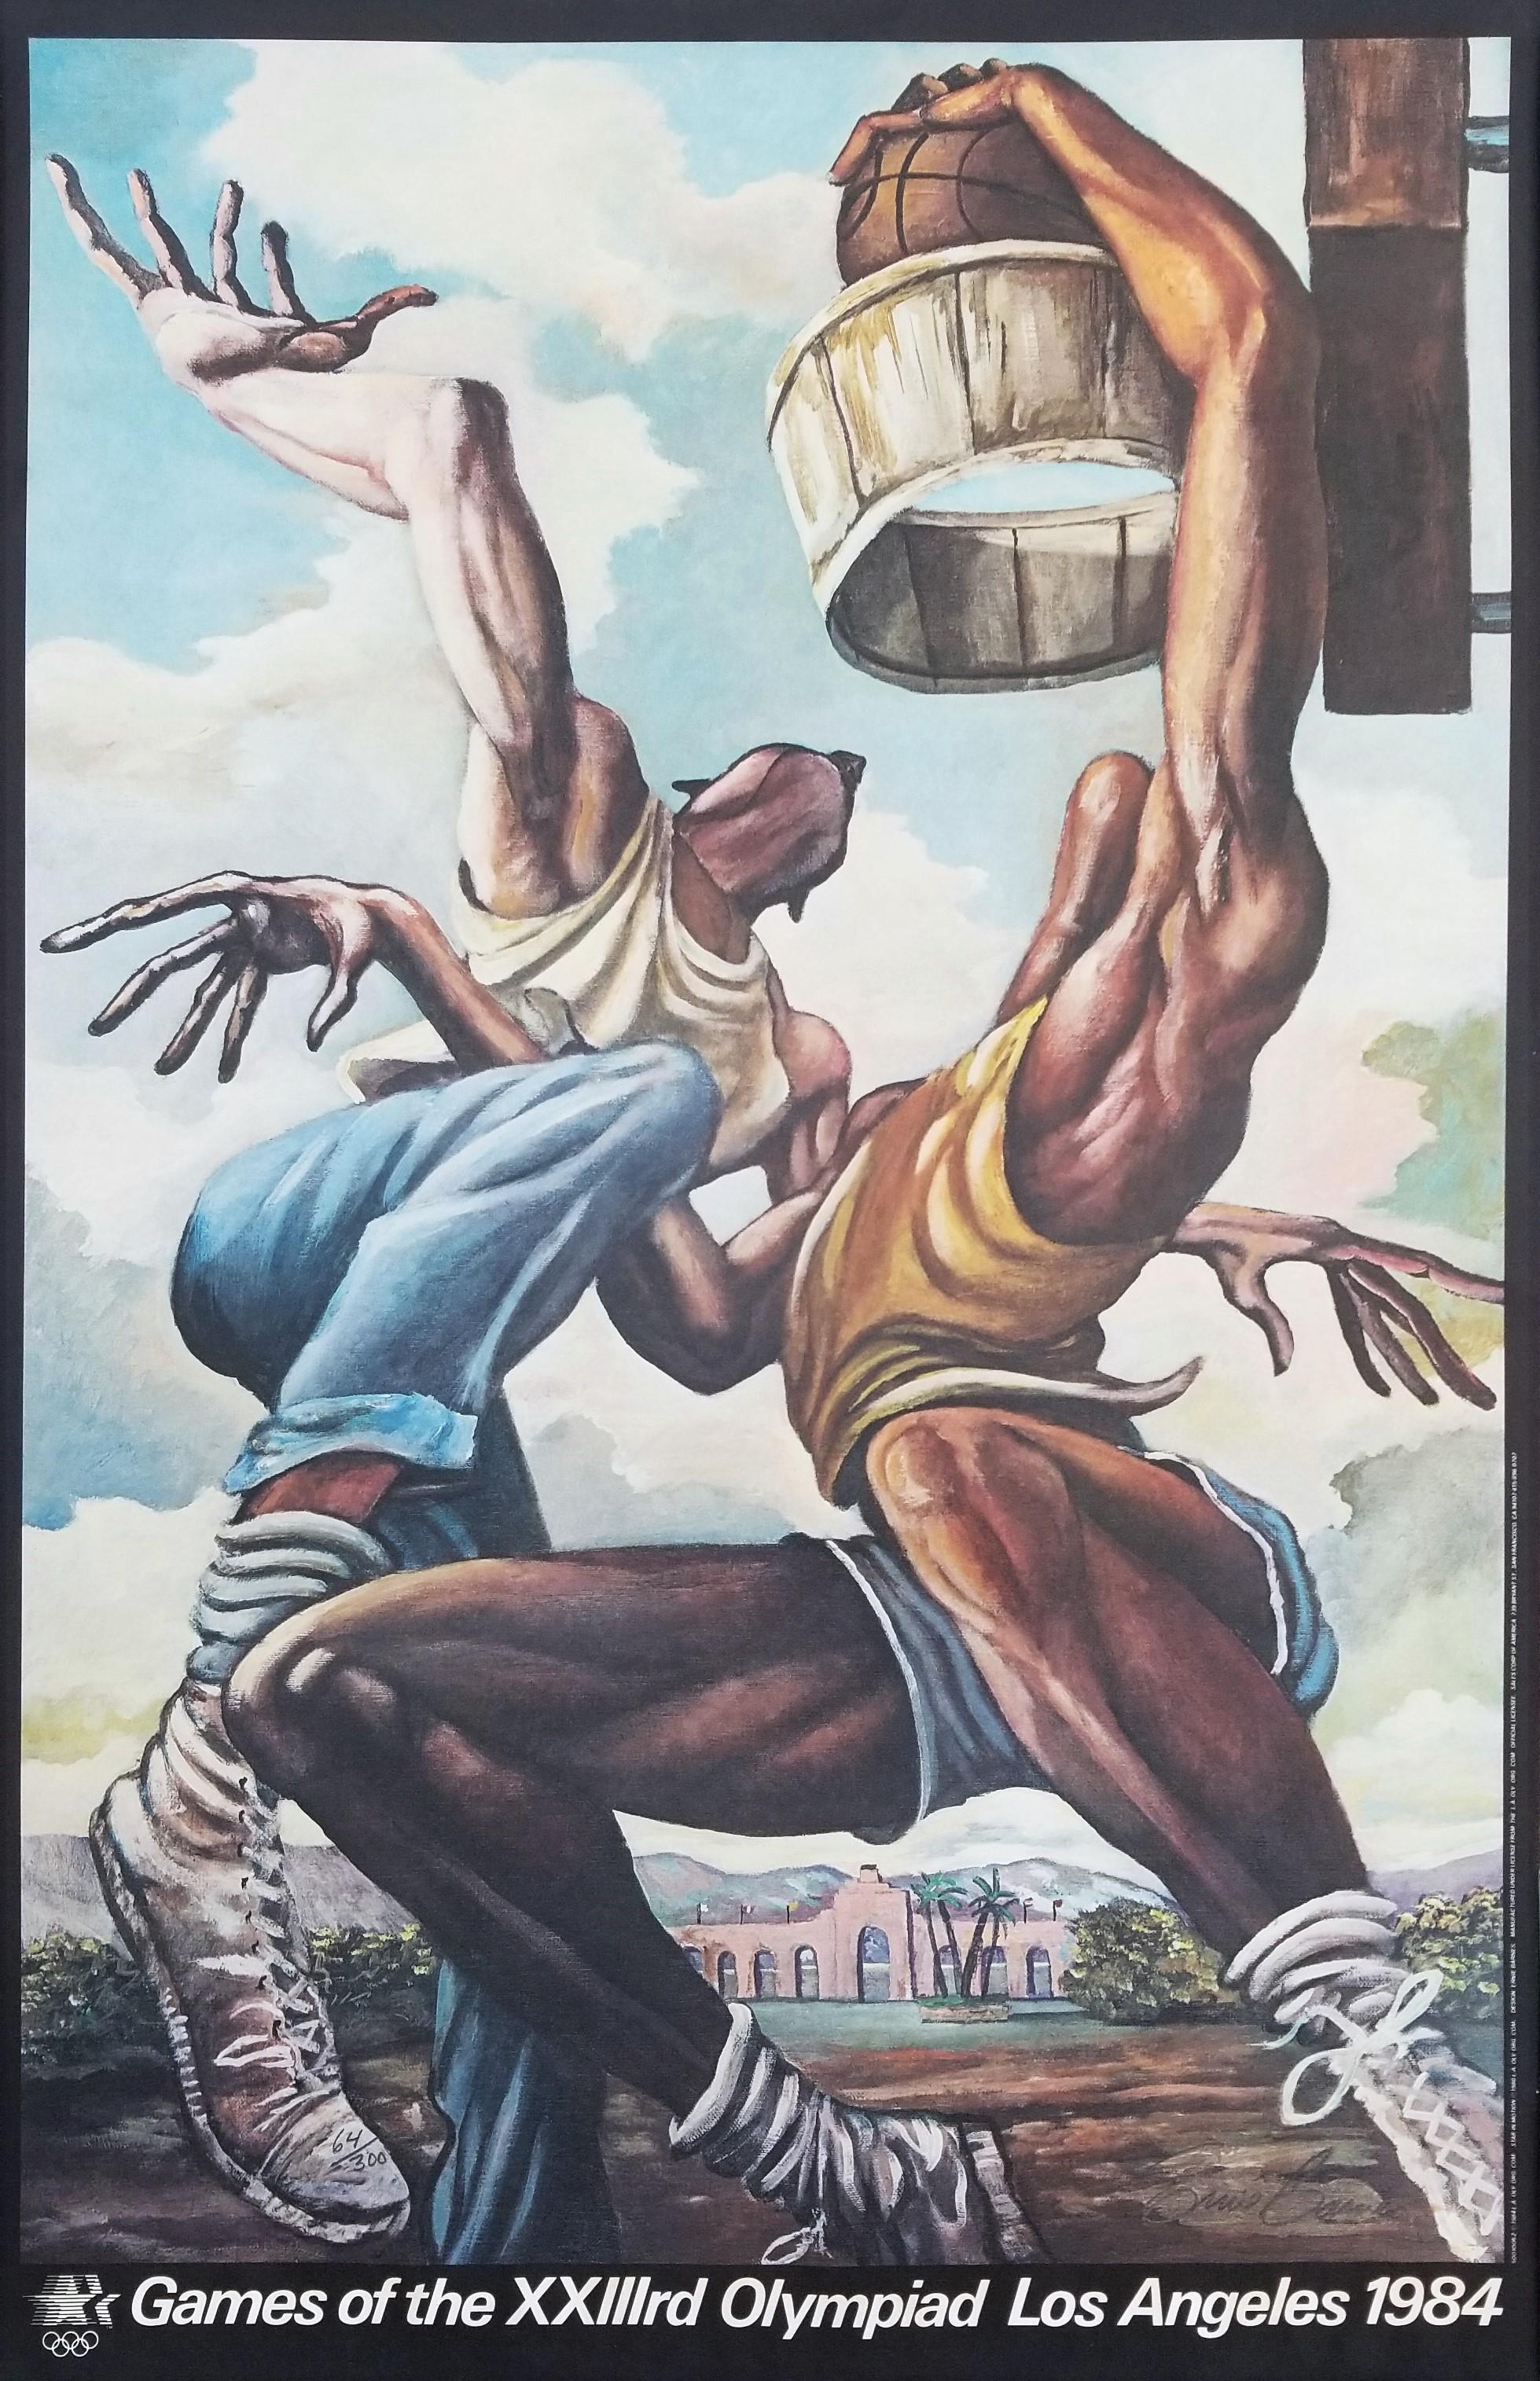 Ernie Barnes Figurative Print - Los Angeles 1984 Olympic Games (One-on-One) Poster (Signed)